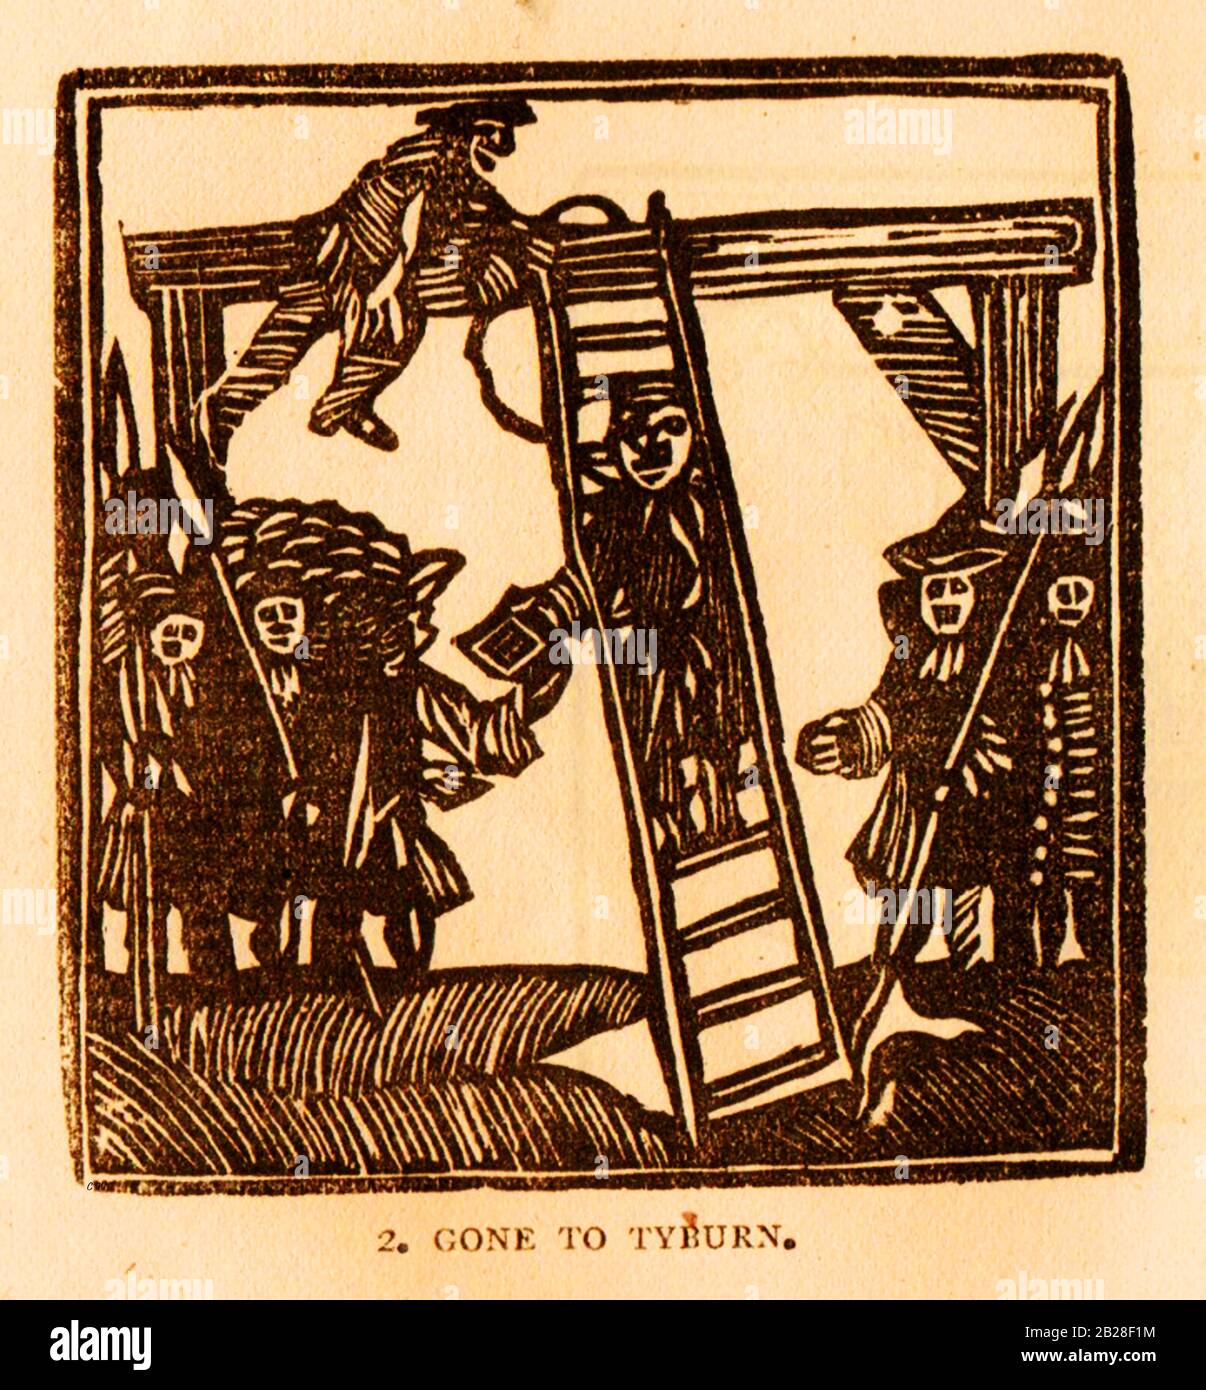 An old woodcut showing men preparing the gallows at Tyburn in the 1700's. The infamous gallows were situated at a crossroad in what was then the village of Tyburn in the parish of Marylebone, but is now a part of London near Marble Arch.. All hangings were viewed by the public who knew the place colloquially as'The Tyburn Tree' or  'Gods Tribunal' . Oxford Street was previously Tyburn Road (in the mid 1700s) and Edgware Road and Park Lane was known as  Tyburn Lane. The 1st execution here was recorded in 1196 and the last in 1783 (on a new moveable gallows) Stock Photo